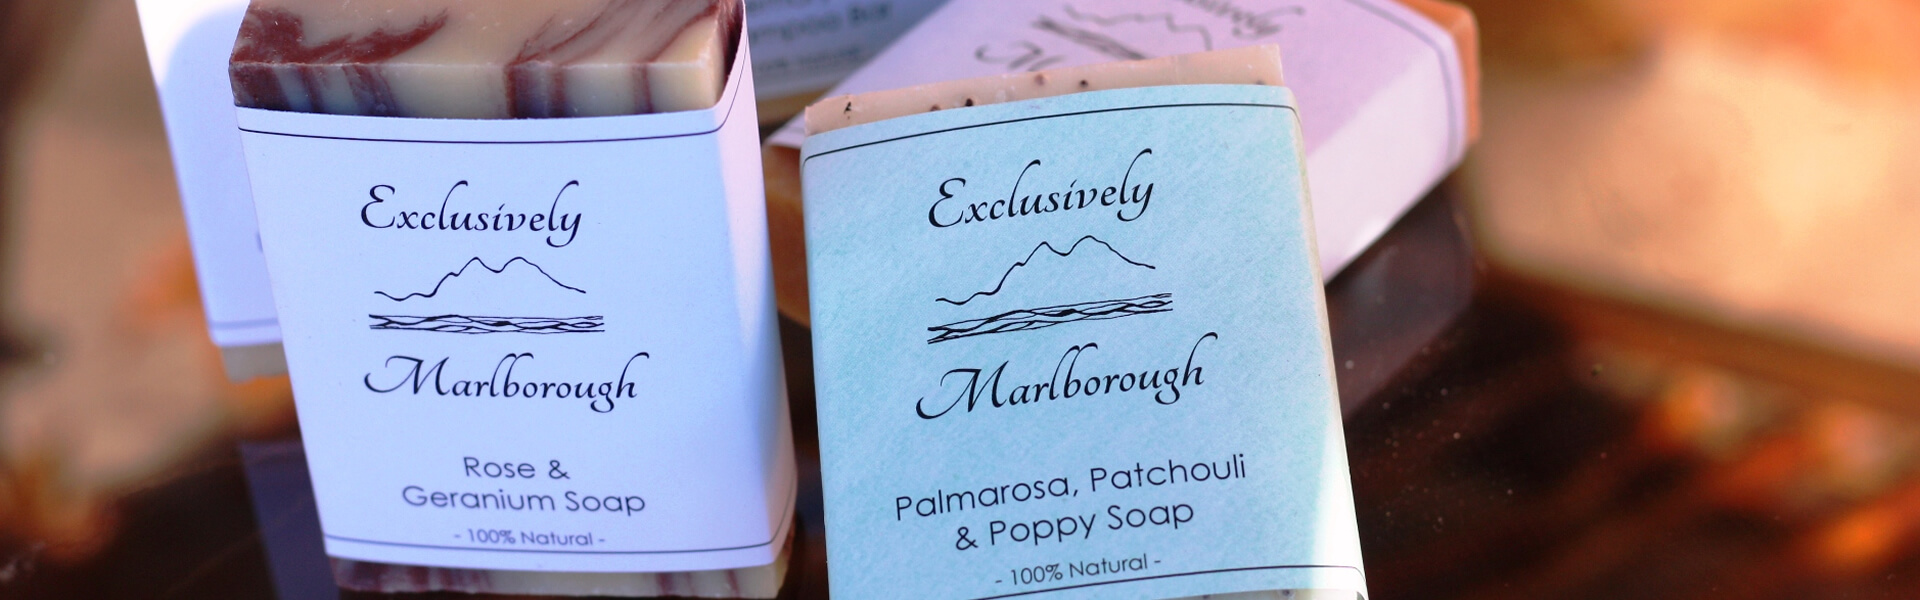 Natural Wholesale Soap And Bar Options From Jeymar Soap And Body In Blenheim Marlborough NZ